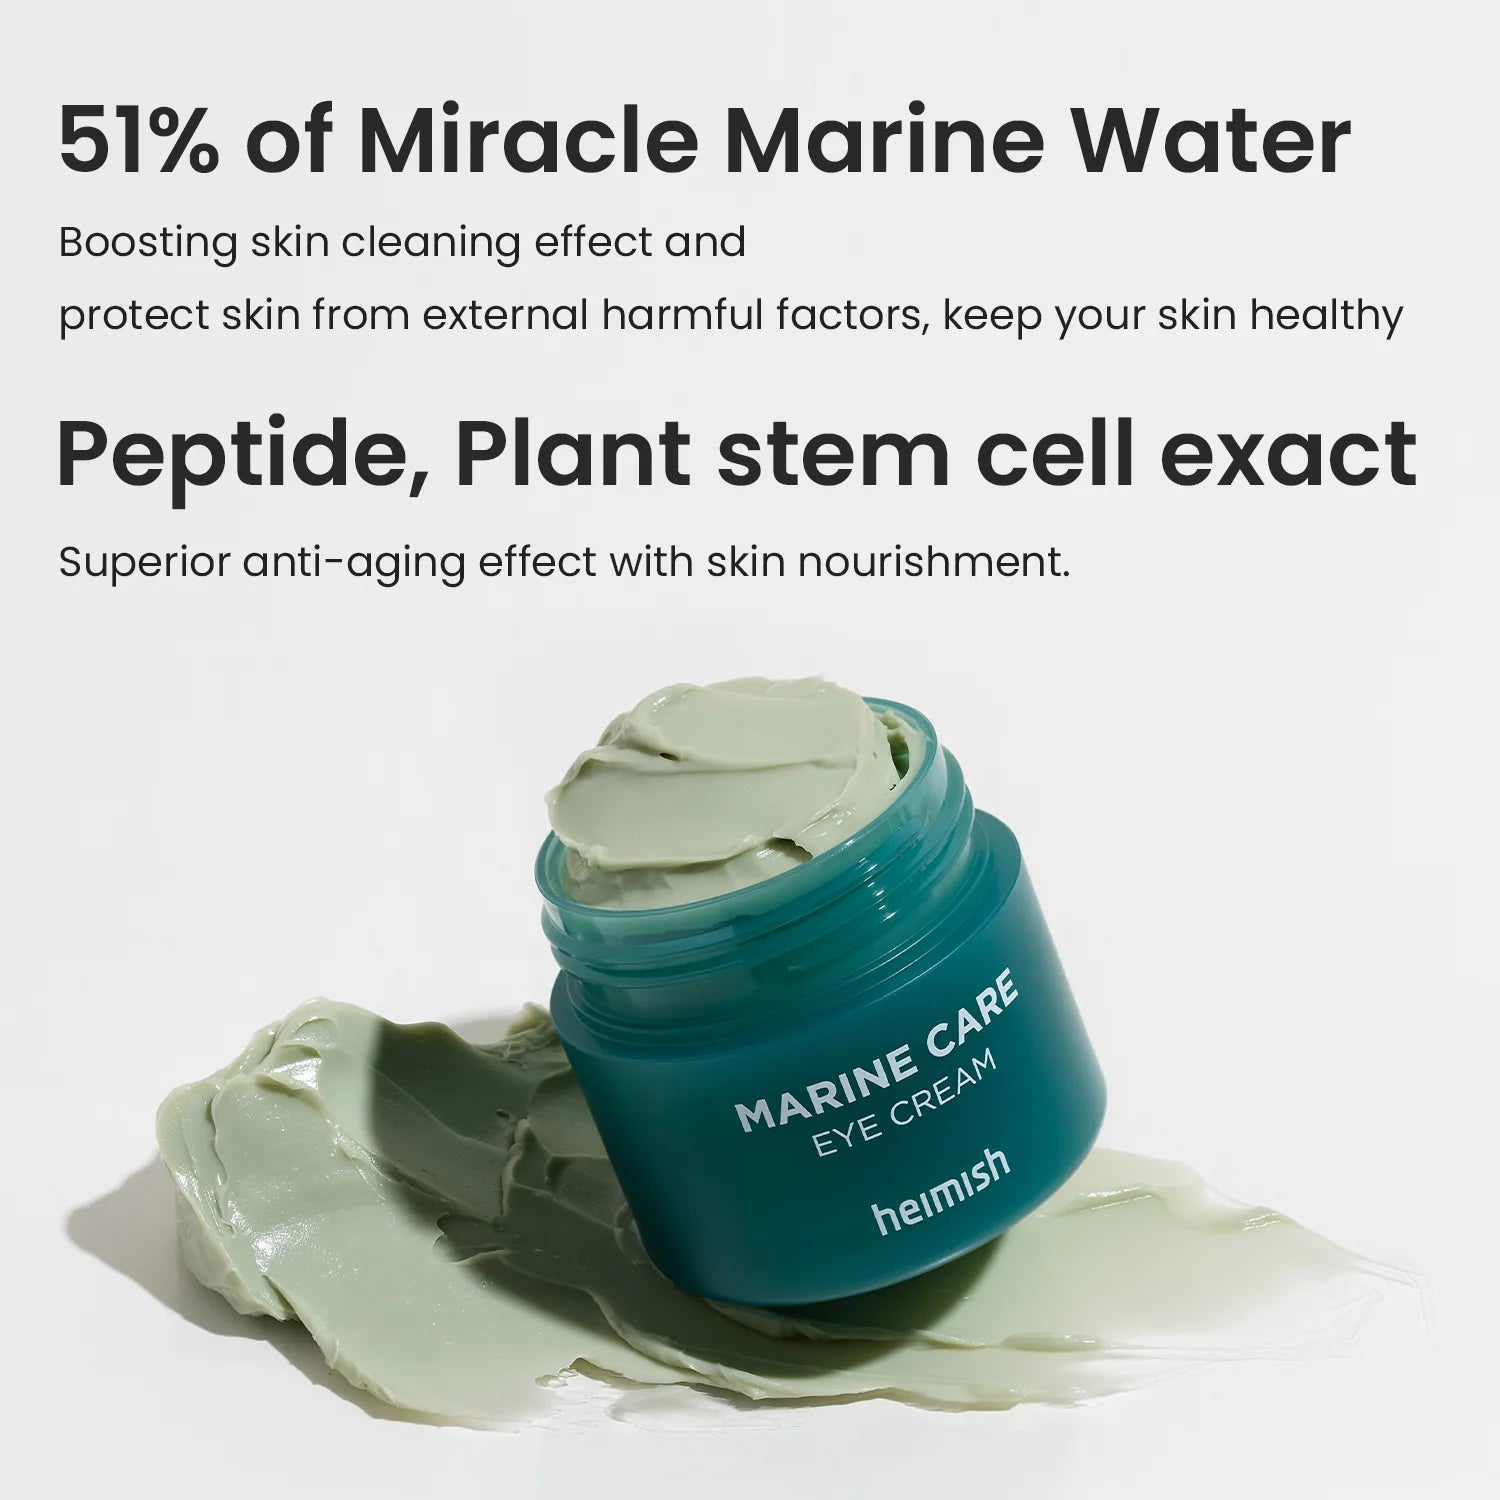 How Marine Care Eye Cream improves skin elasticity and firmness around the delicate eye area for a youthful appearance.